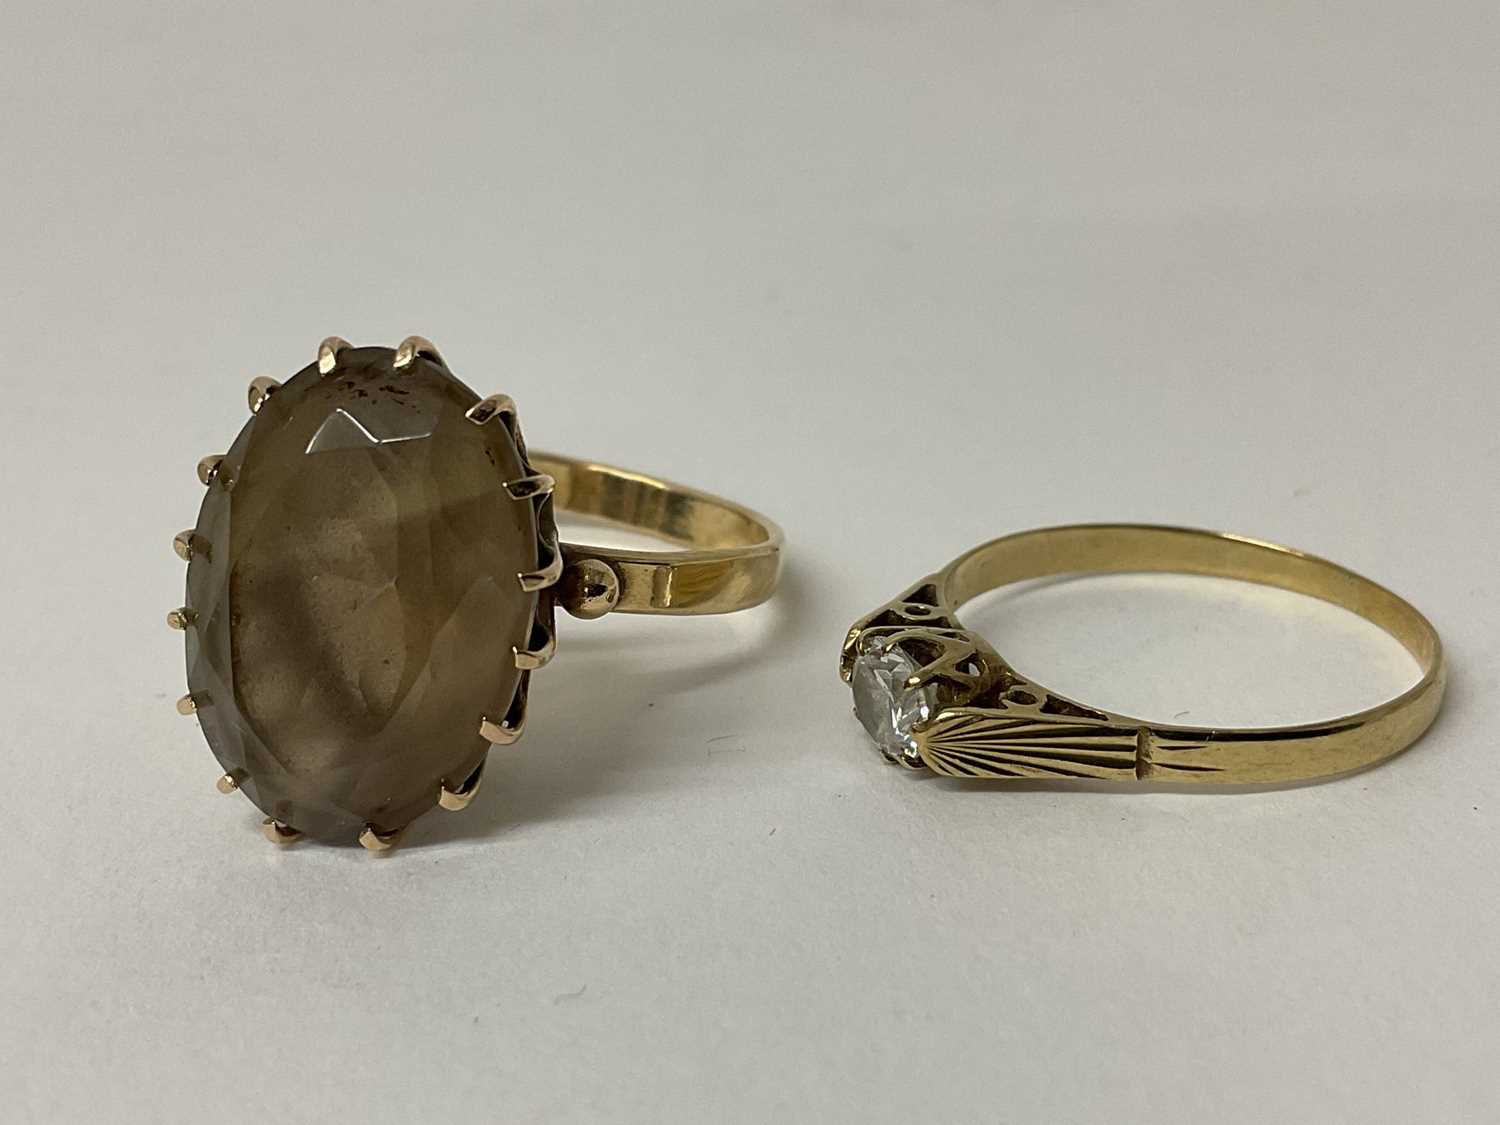 Lot 91 - 14ct gold gem set dress ring, marked 14k, ring size T, together with a 9ct gold single stone ring, ring size S 1/2 (2).